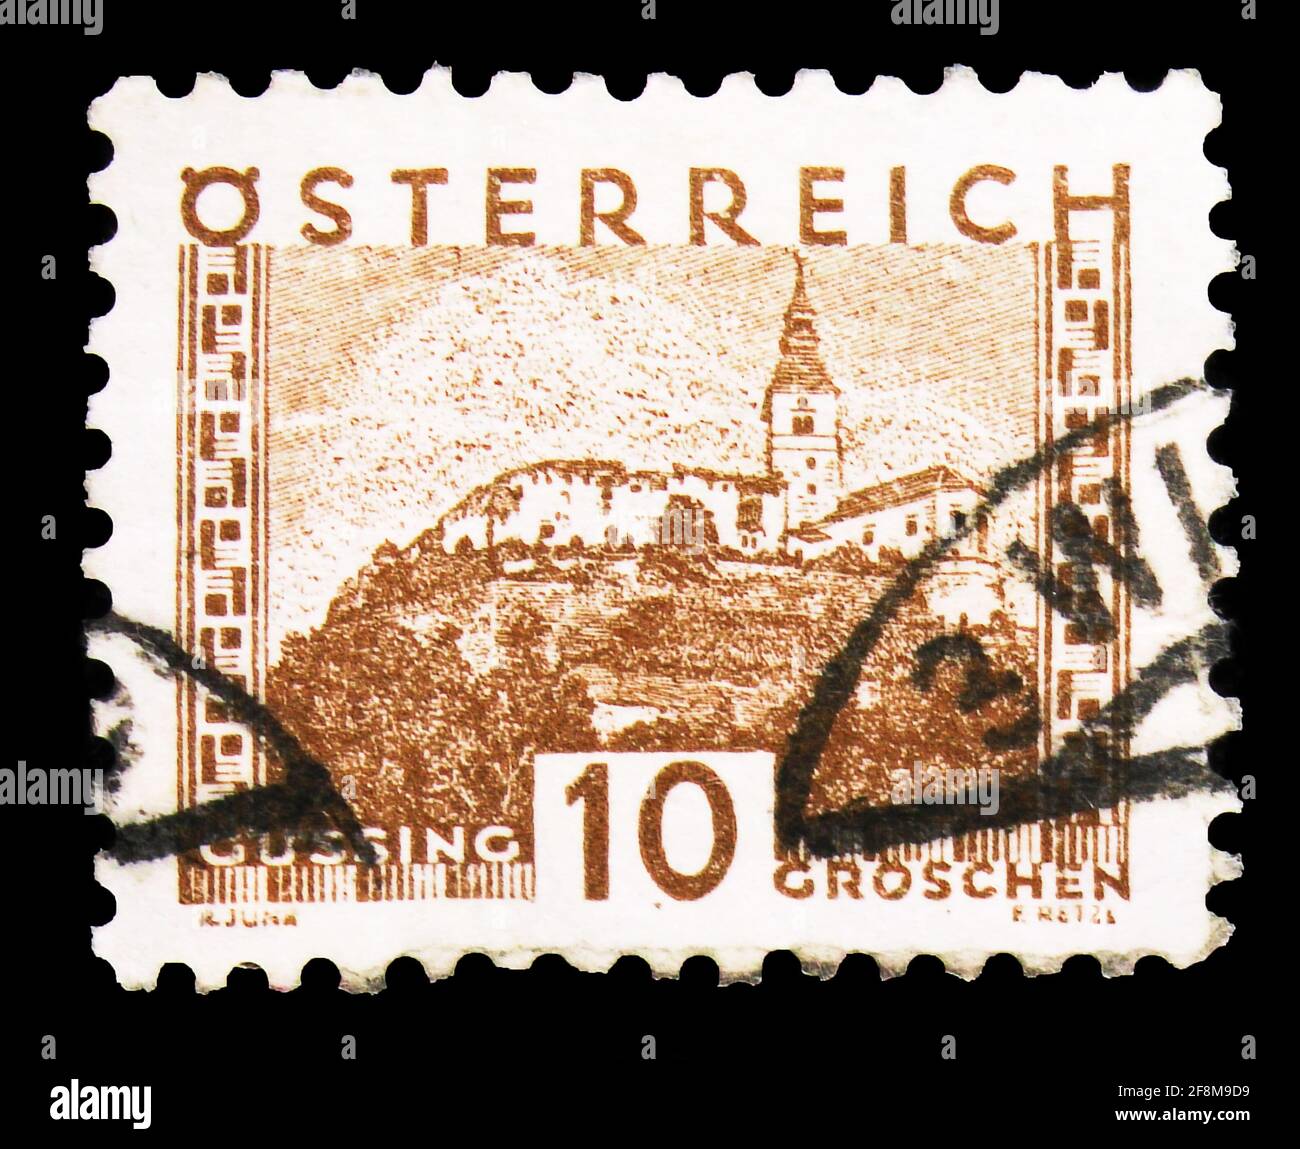 MOSCOW, RUSSIA - SEPTEMBER 30, 2019: Postage stamp printed in Austria shows Güssing Castle, Burgenland - small format, Landscapes 1929/32 serie, circa Stock Photo